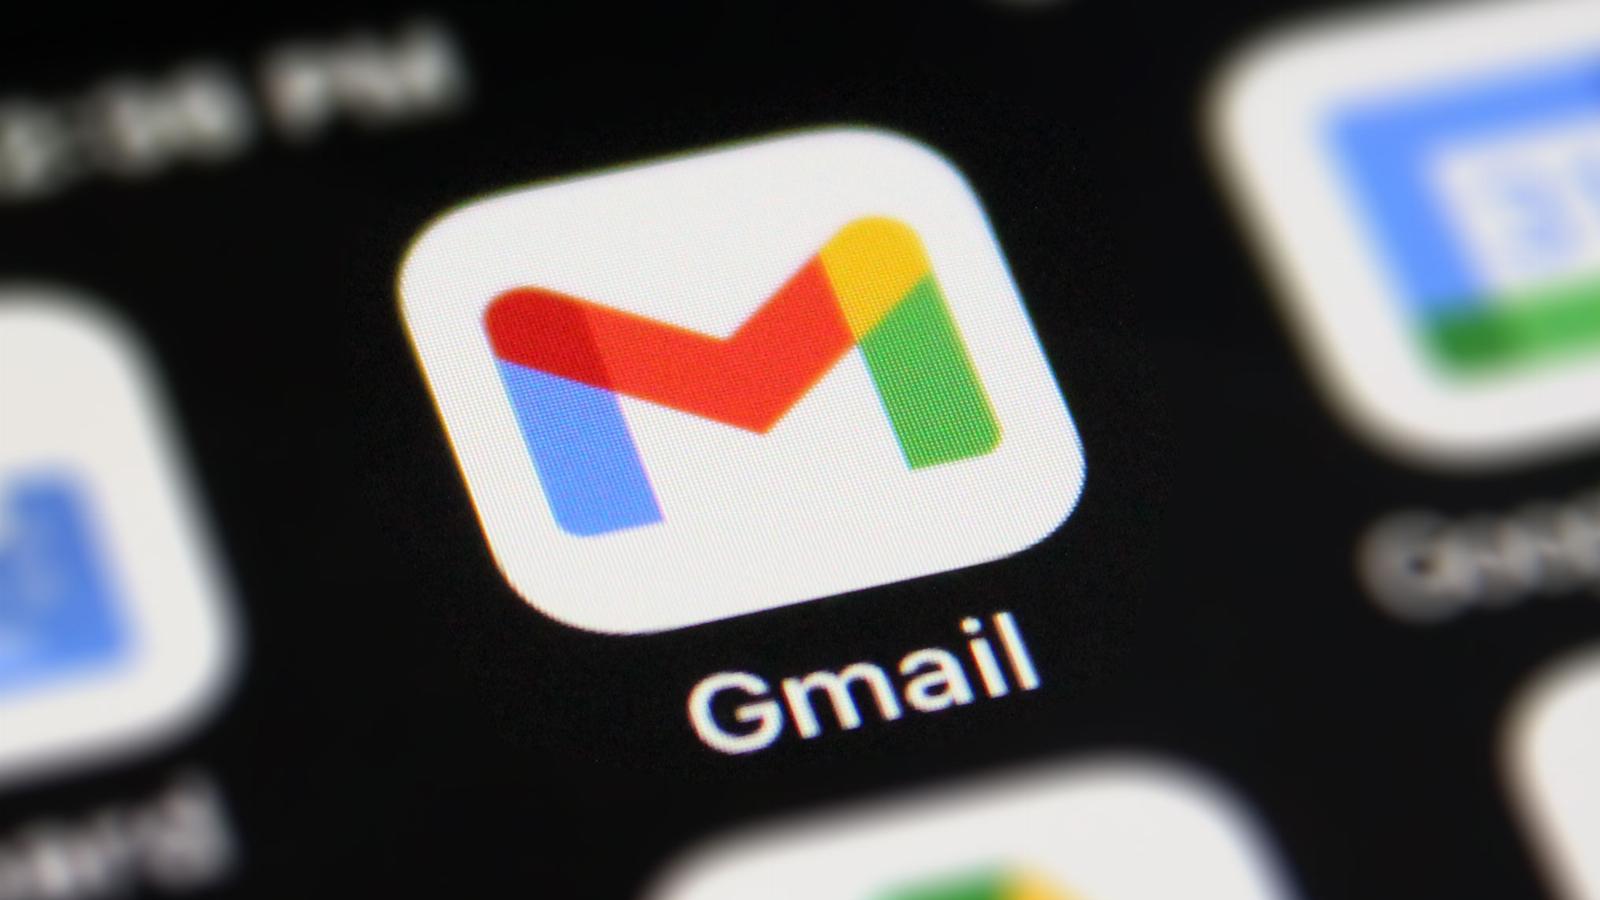 You can now react to messages on Gmail